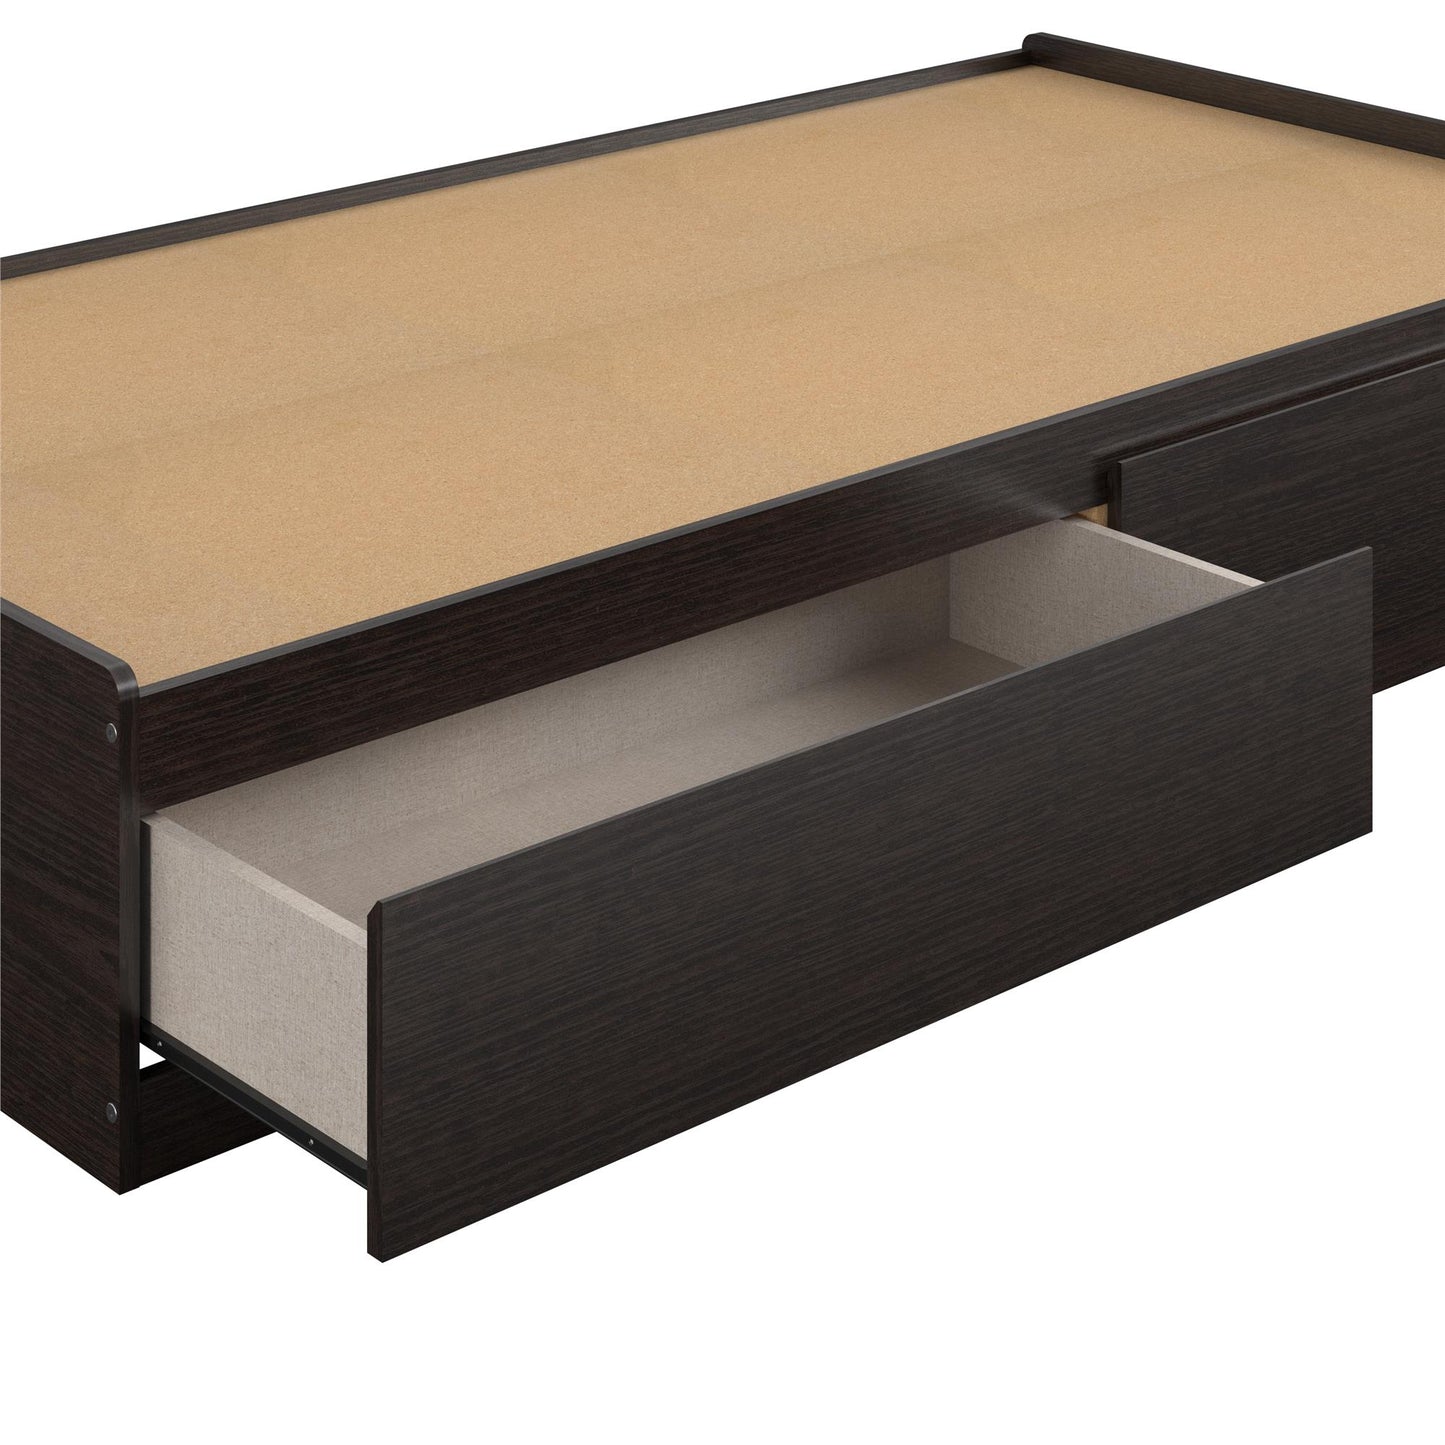 Platform Bed with 2 Large Storage Drawers and No Box Spring Required - Espresso - Twin